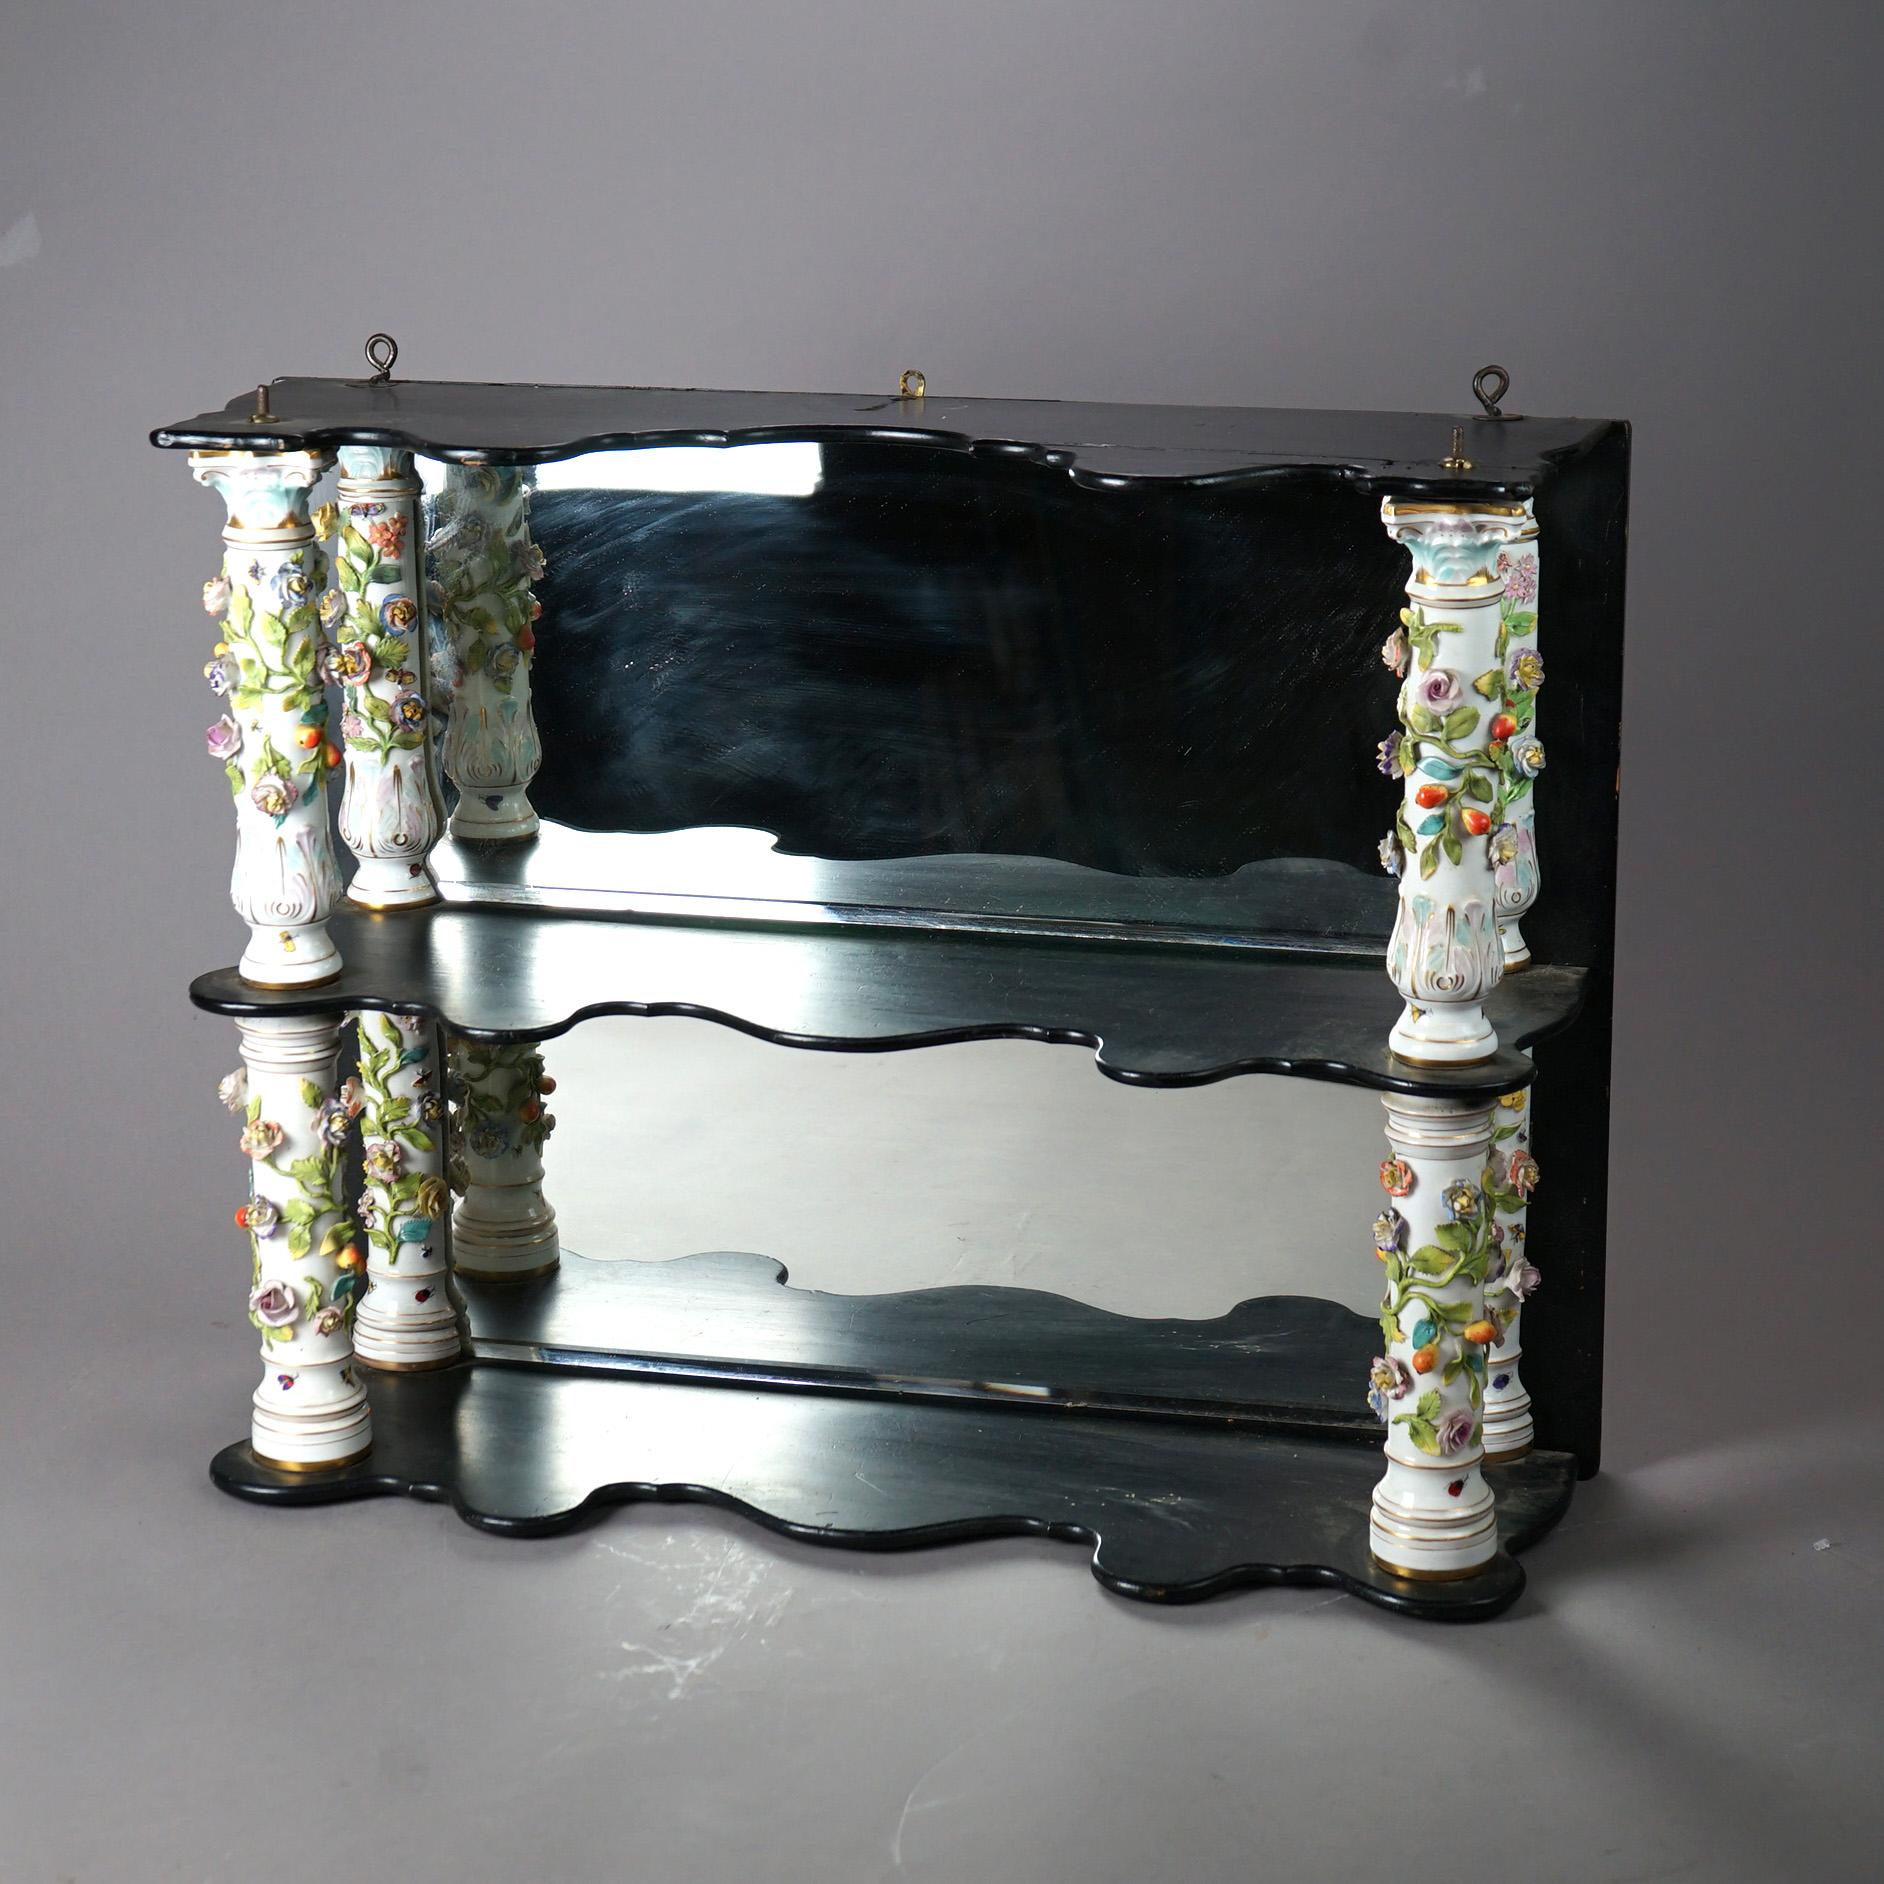 An antique wall shelf offers shaped ebonized wood shelves with Dresden porcelain supports having hand painted applied flowers and mirrored back, c1890

Measures - 21.5